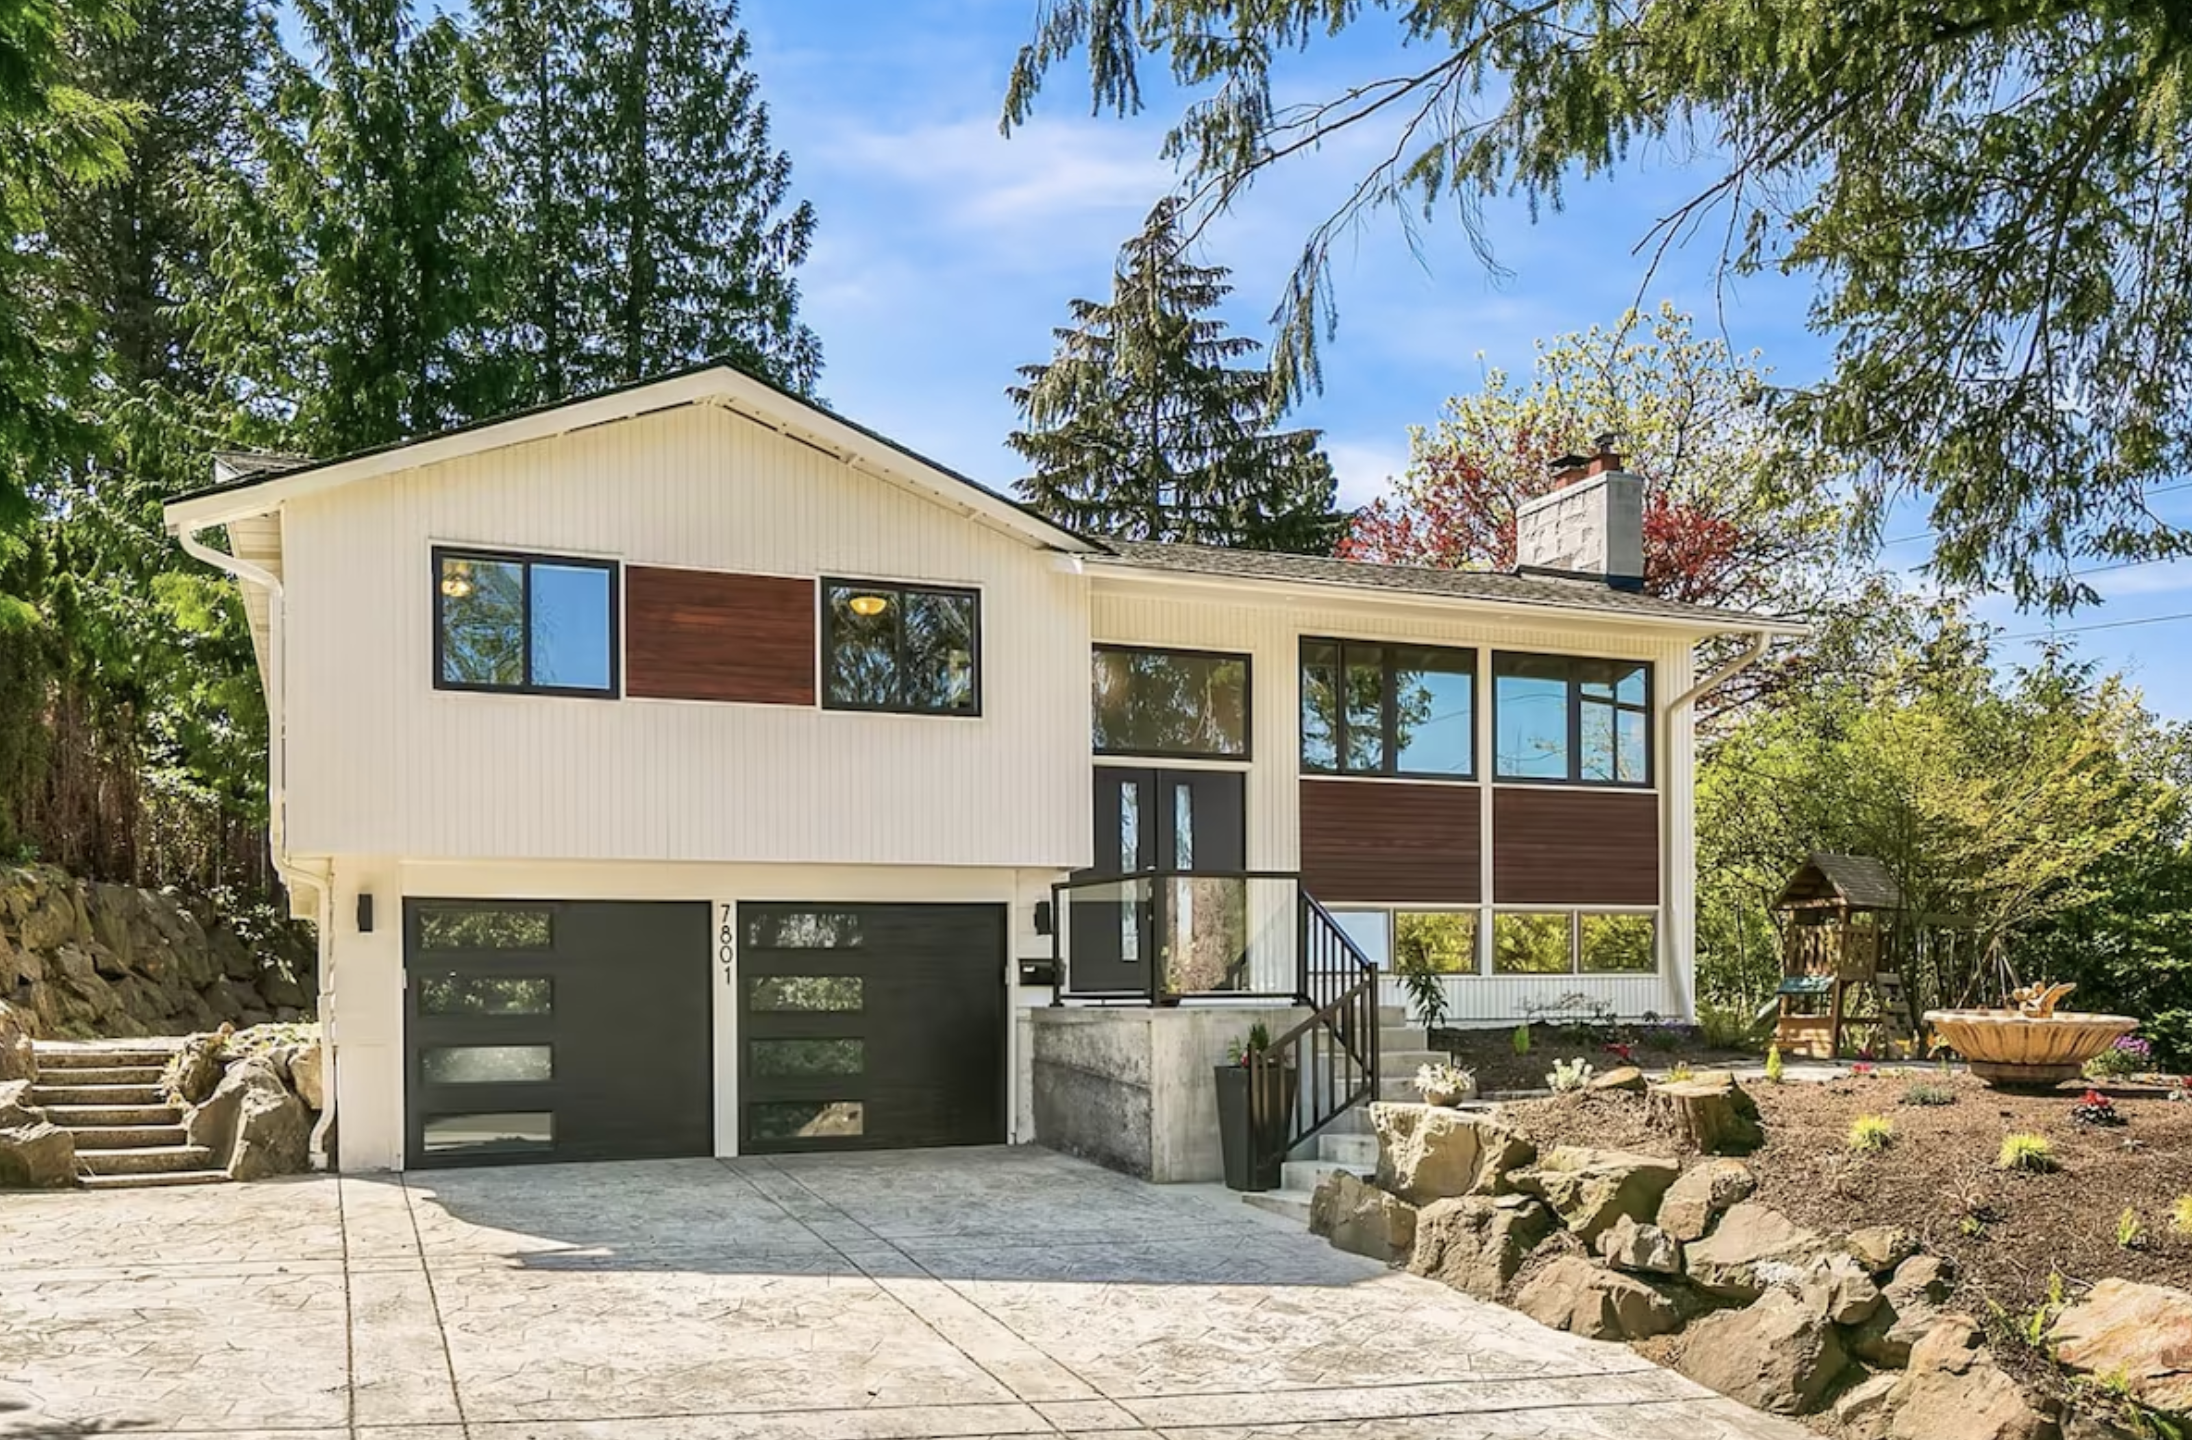 <p><strong>Bed & bath:</strong> 4 bedrooms, 3 baths<br> <strong>Top amenities:</strong> Indoor fireplace, piano, sunroom, garden<br> <strong>Nearby attractions:</strong> In between Bellevue and Seattle; Pioneer Park hiking trails</p> <p>For ample space in a residential neighborhood, this Mercer Island home delivers. It has room for up to 10 guests, including a bunk bed room for the kids, multiple living spaces, a fully-stocked kitchen, and a large backyard to boot. The sunroom with arcade games is another highlight. Despite its quiet location, you’re just a 15-minute drive from downtown Seattle (there’s parking on-site), where you can check out <a href="https://www.cntraveler.com/shops/seattle/pike-place-market?mbid=synd_msn_rss&utm_source=msn&utm_medium=syndication">Pike Place Market</a>, the Museum of Pop Culture, and <a href="https://www.cntraveler.com/activities/seattle/chihuly-garden-and-glass?mbid=synd_msn_rss&utm_source=msn&utm_medium=syndication">Chihuly Garden and Glass</a>. Parents, note that you can rent items like strollers and baby swingers from the host, and there are plenty of games and a playset out back for older kids.</p> $201, Airbnb (starting price). <a href="https://www.airbnb.com/rooms/48979130">Get it now!</a>